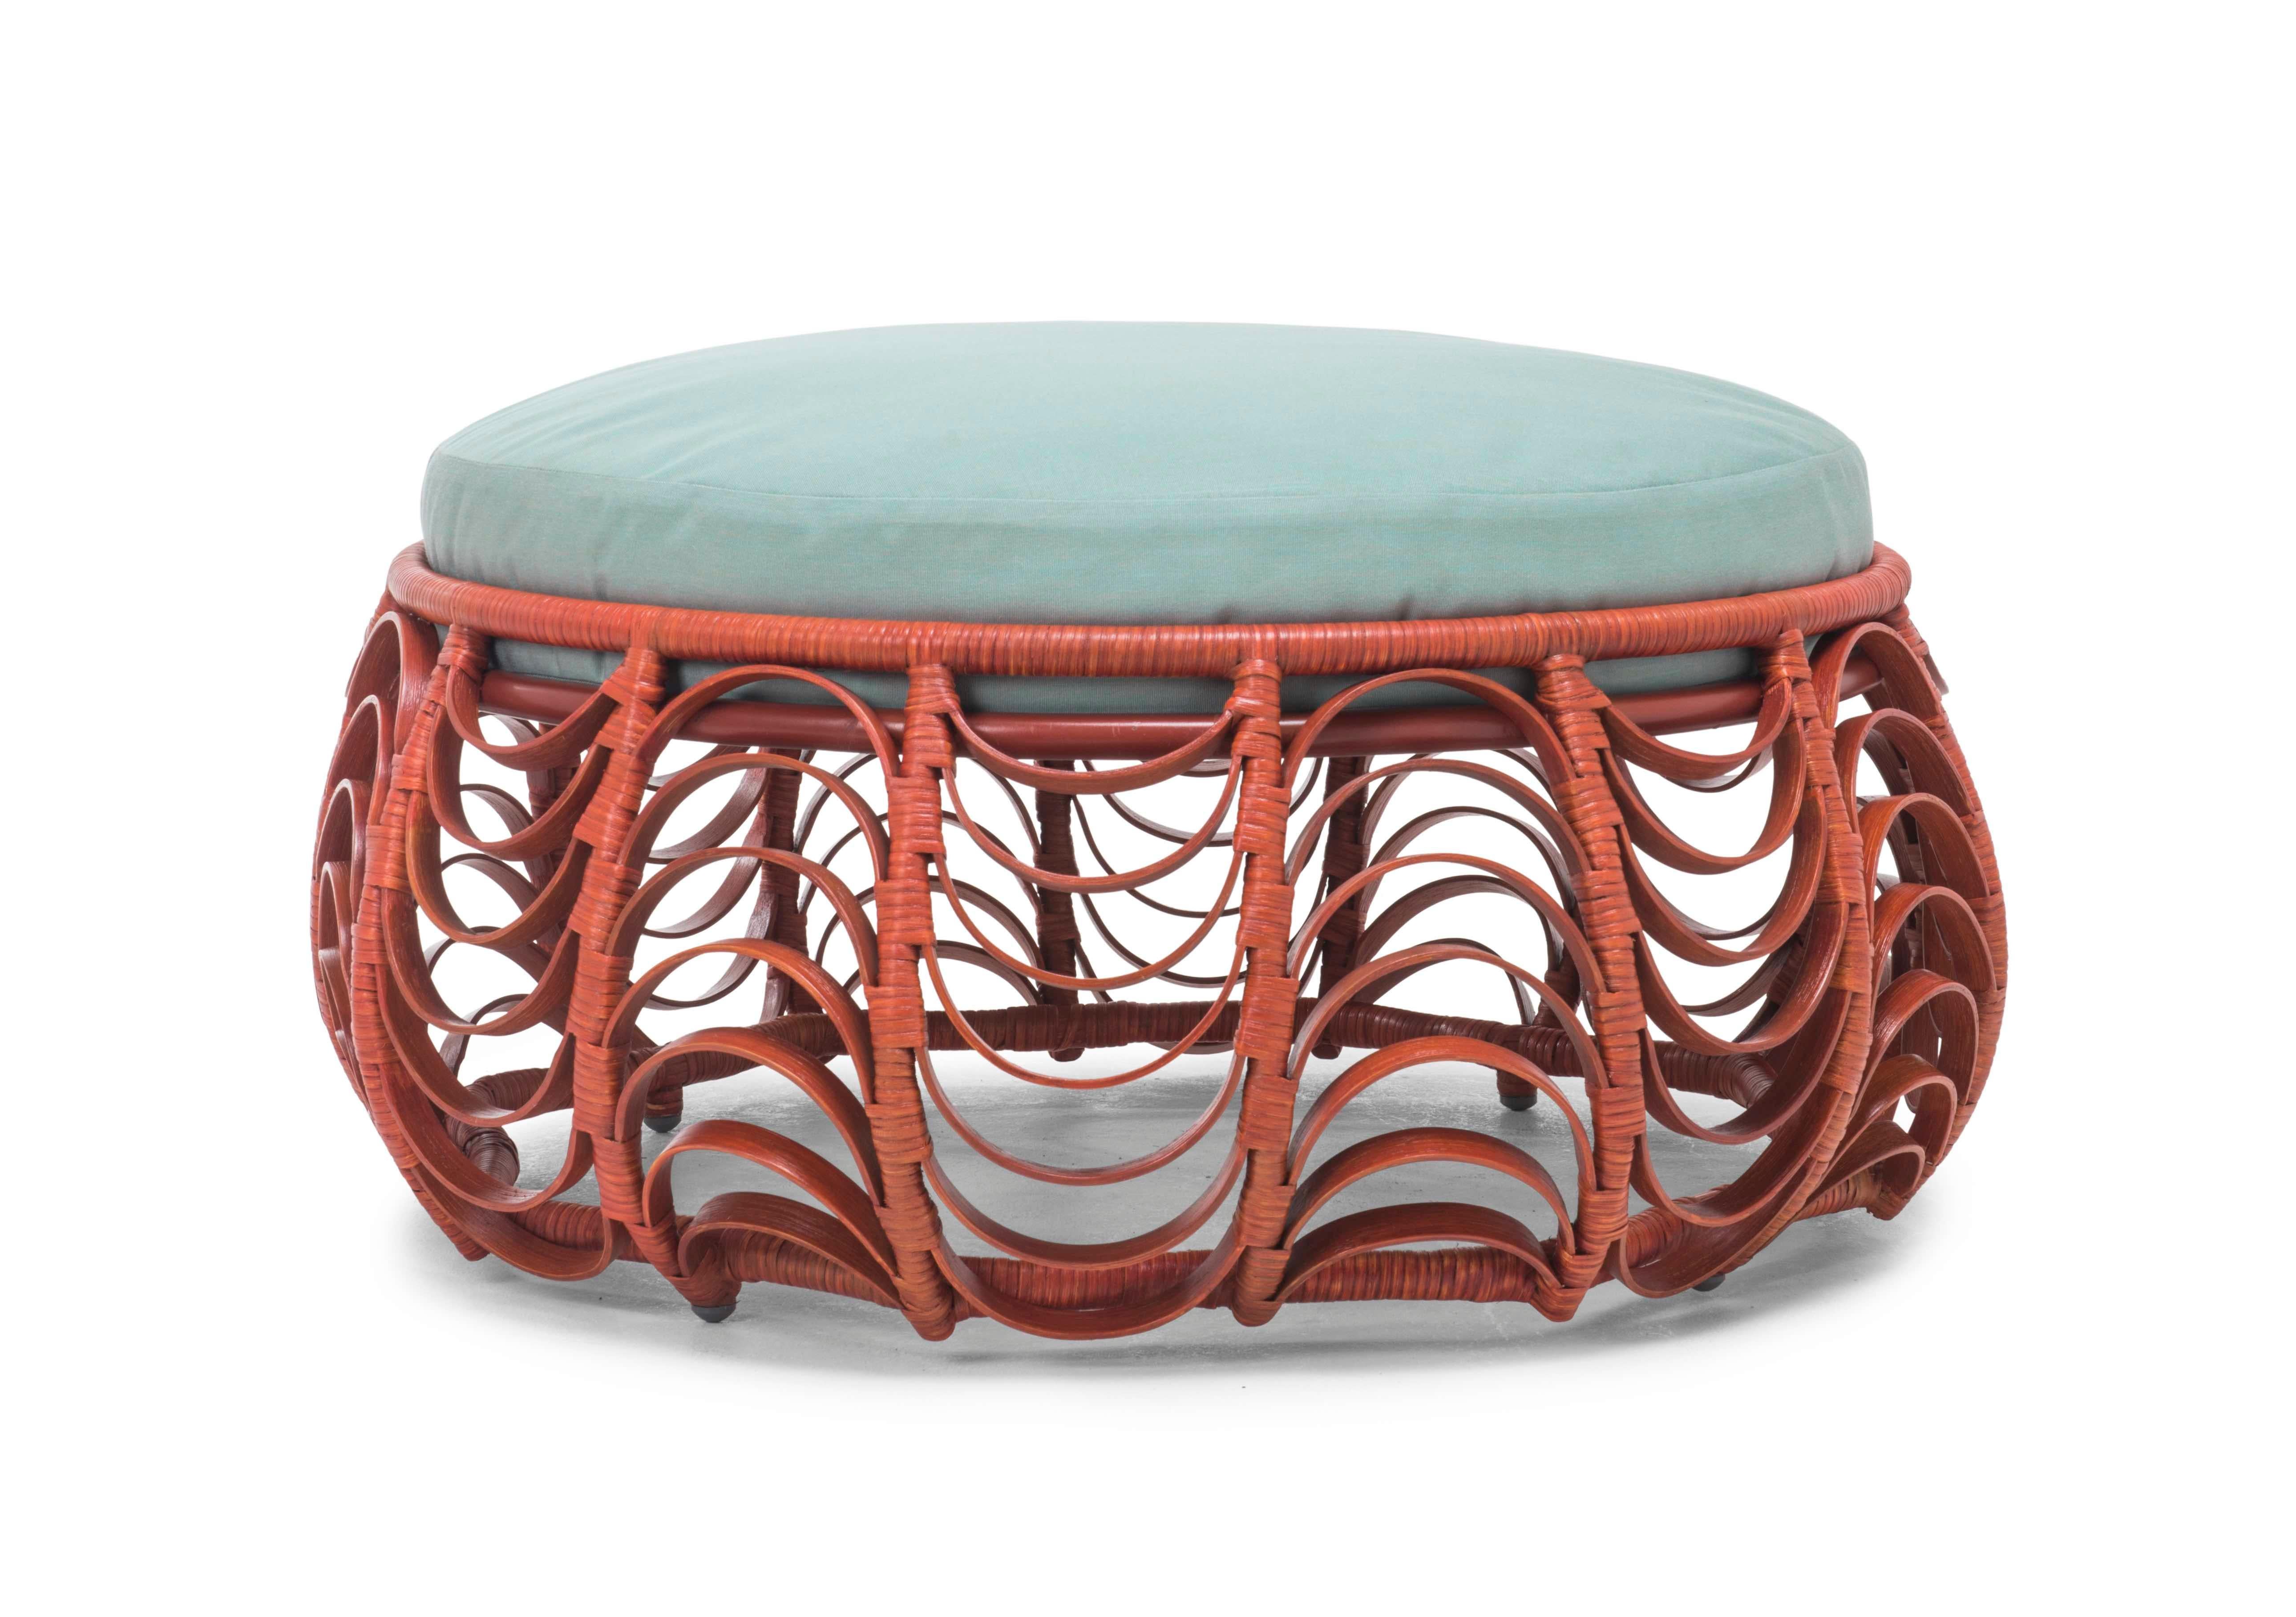 Indoor lasso ottoman by Kenneth Cobonpue
Materials: Rattan, steel. 
Also available in other colors and for outdoors.
Dimensions: diameter 90 cm x height 40cm 

Drift away on a flight of dreams in Lasso, a visual expression of the story of